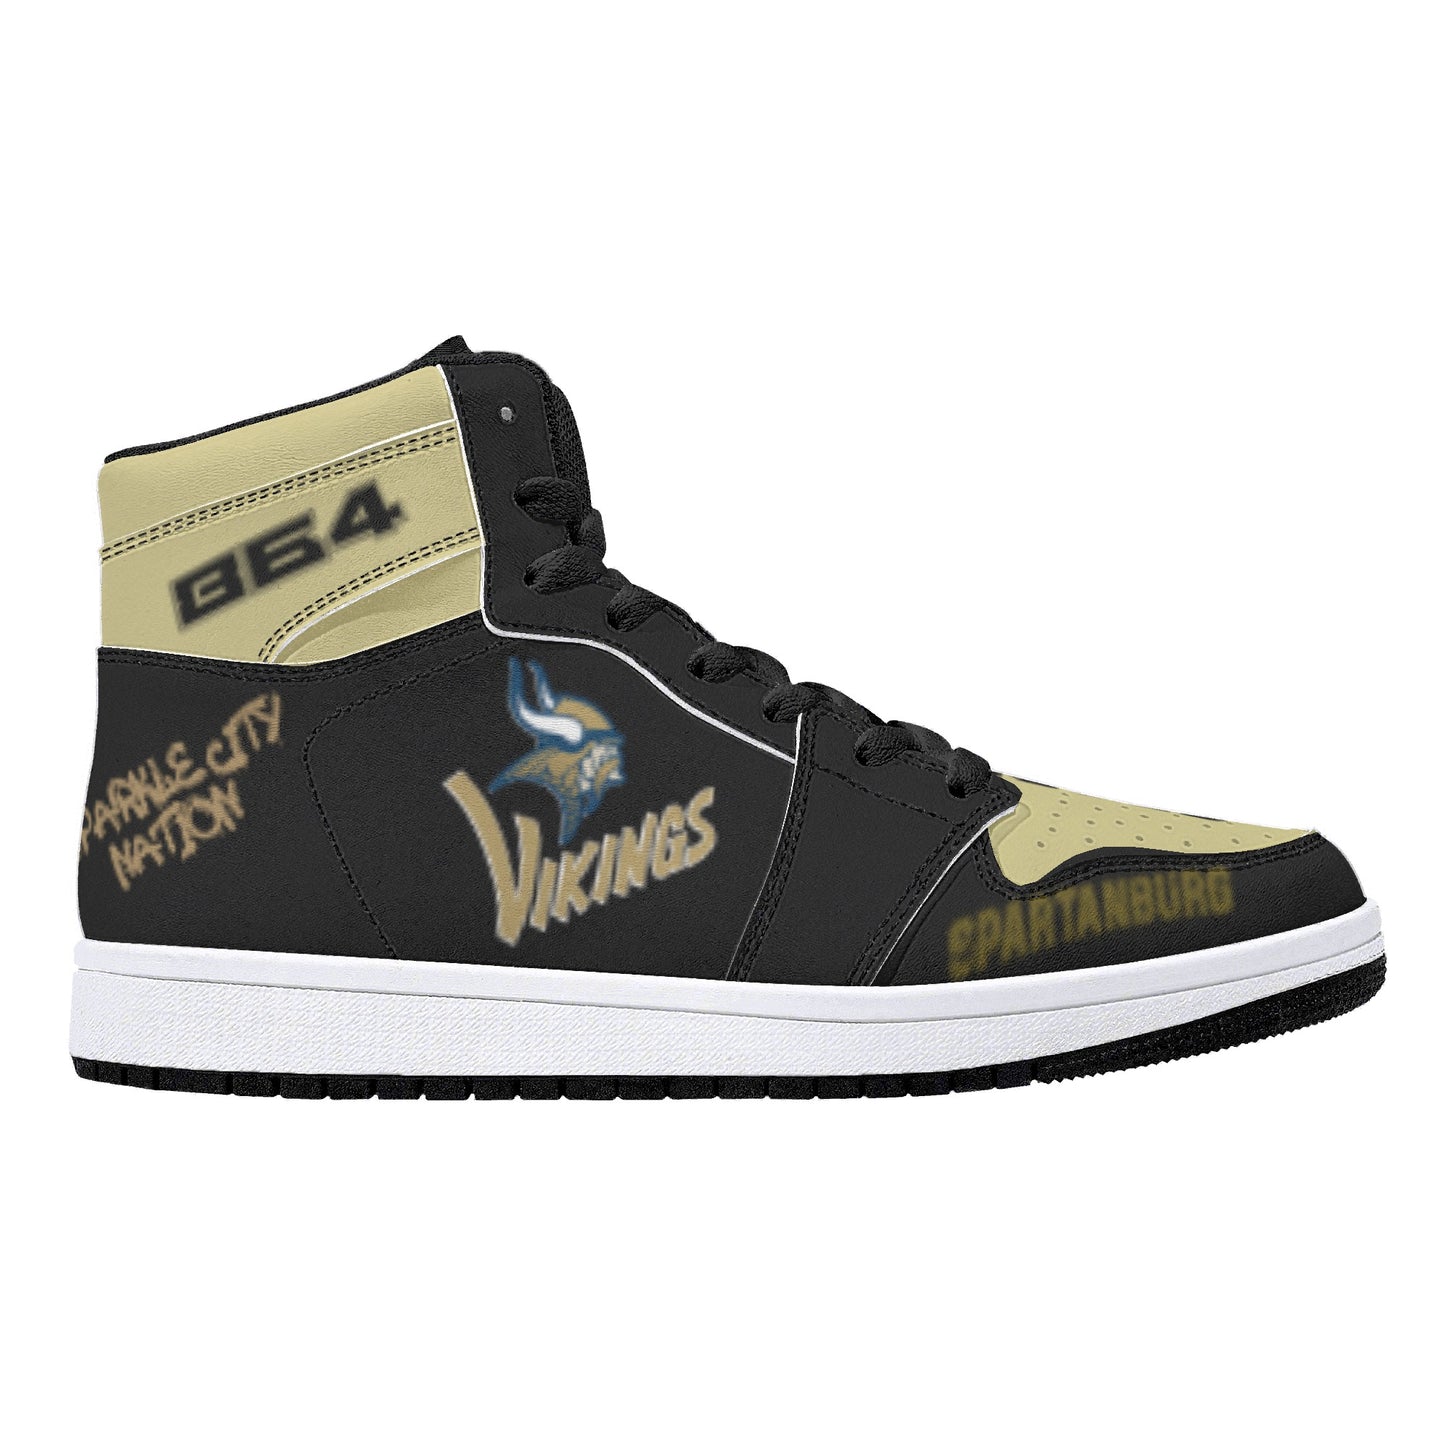 Bros "Viking Hyphy ViBe GameDay" High Top Sneakers